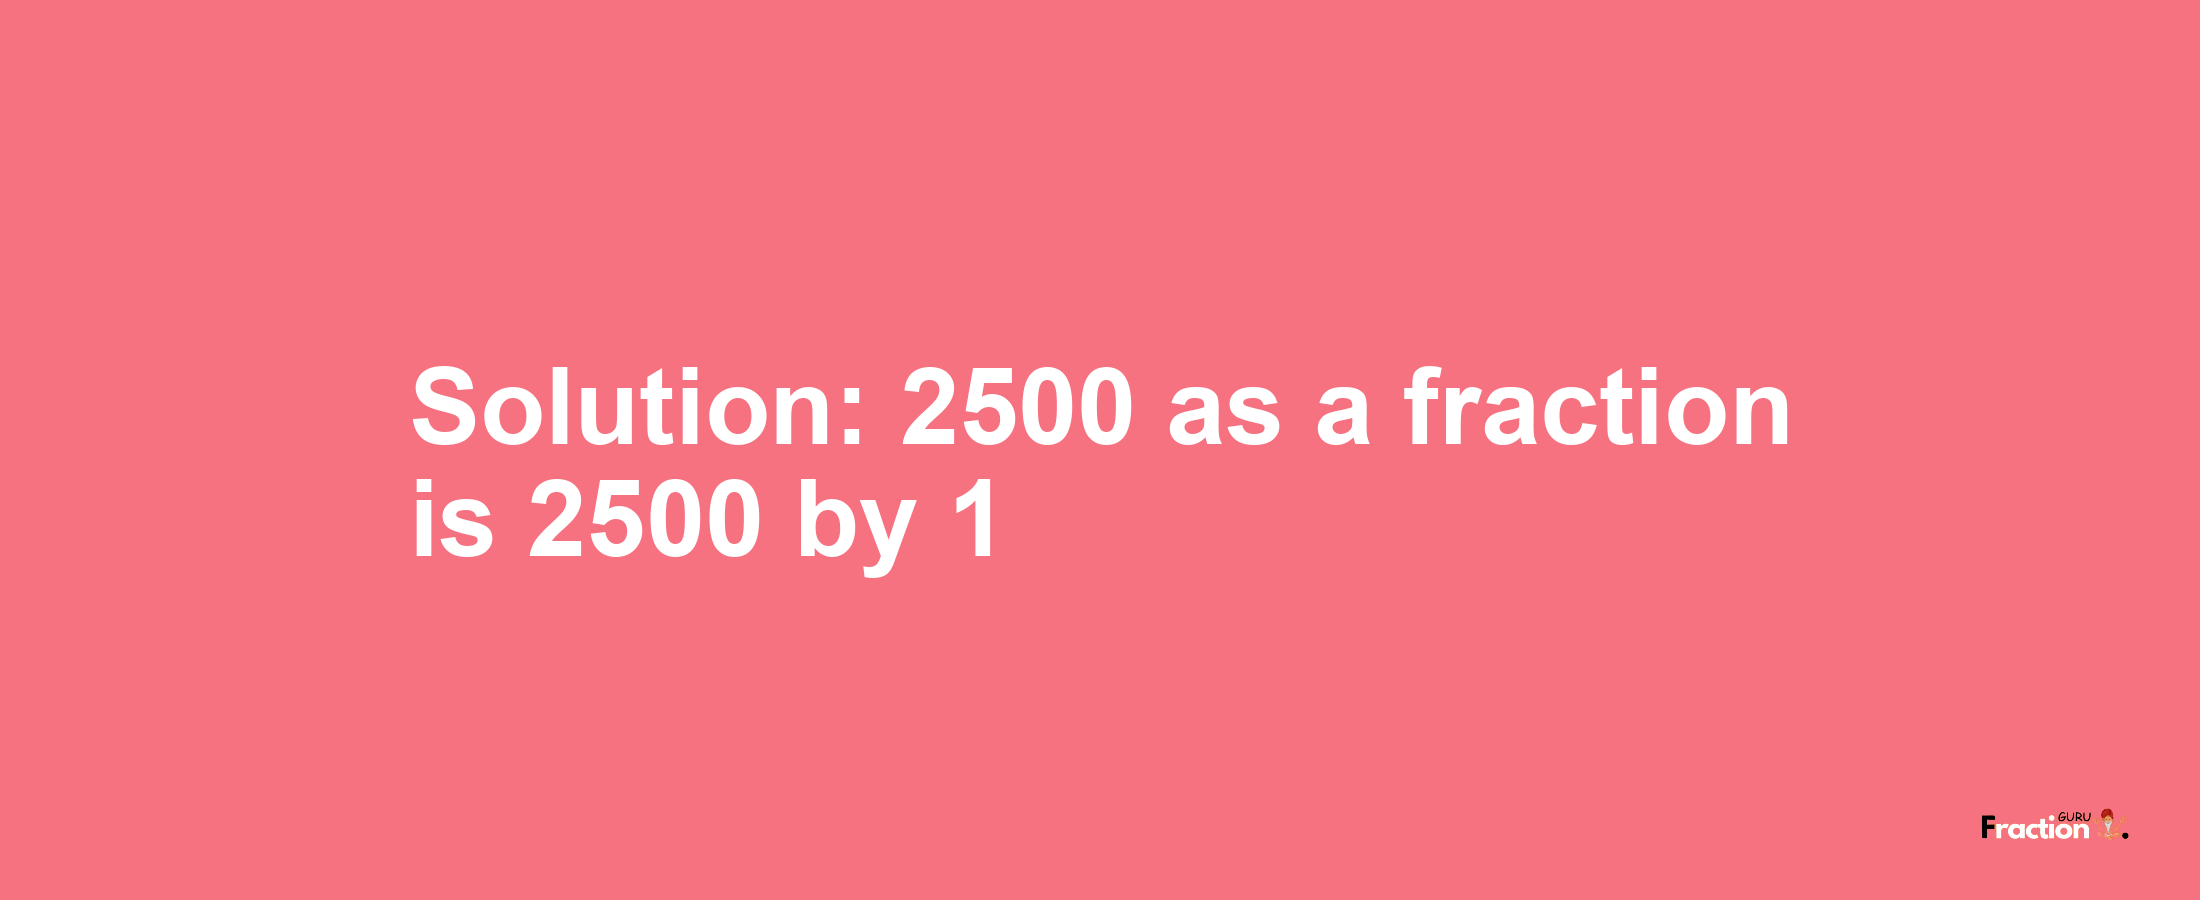 Solution:2500 as a fraction is 2500/1